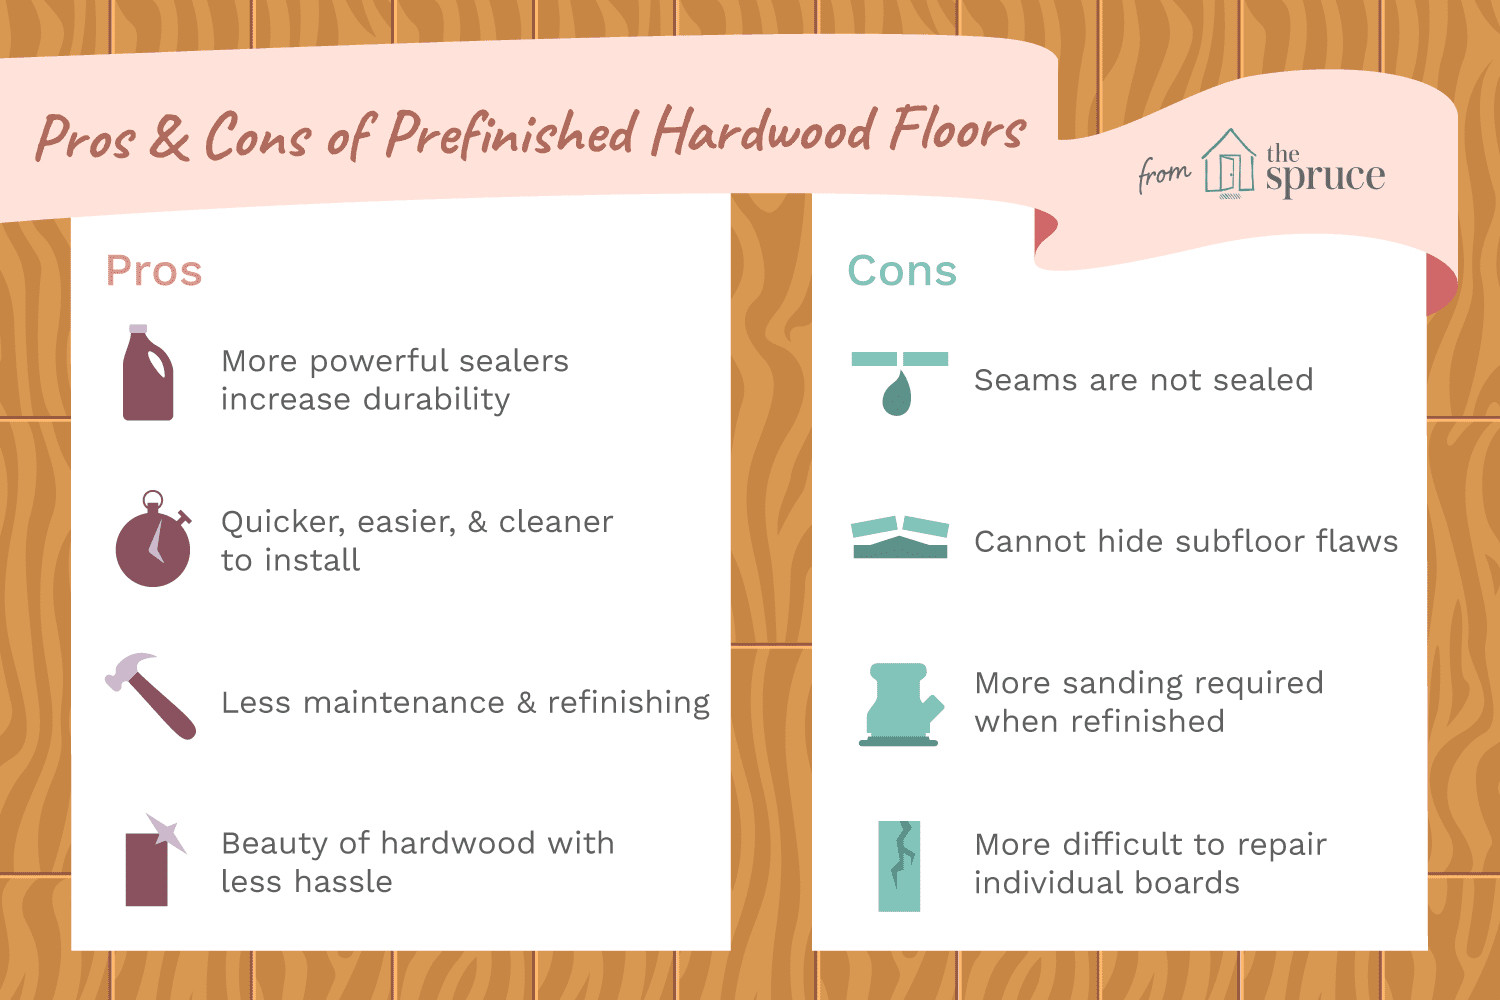 Diamond W Hardwood Flooring Of the Pros and Cons Of Prefinished Hardwood Flooring Throughout Prefinished Hardwood Floors